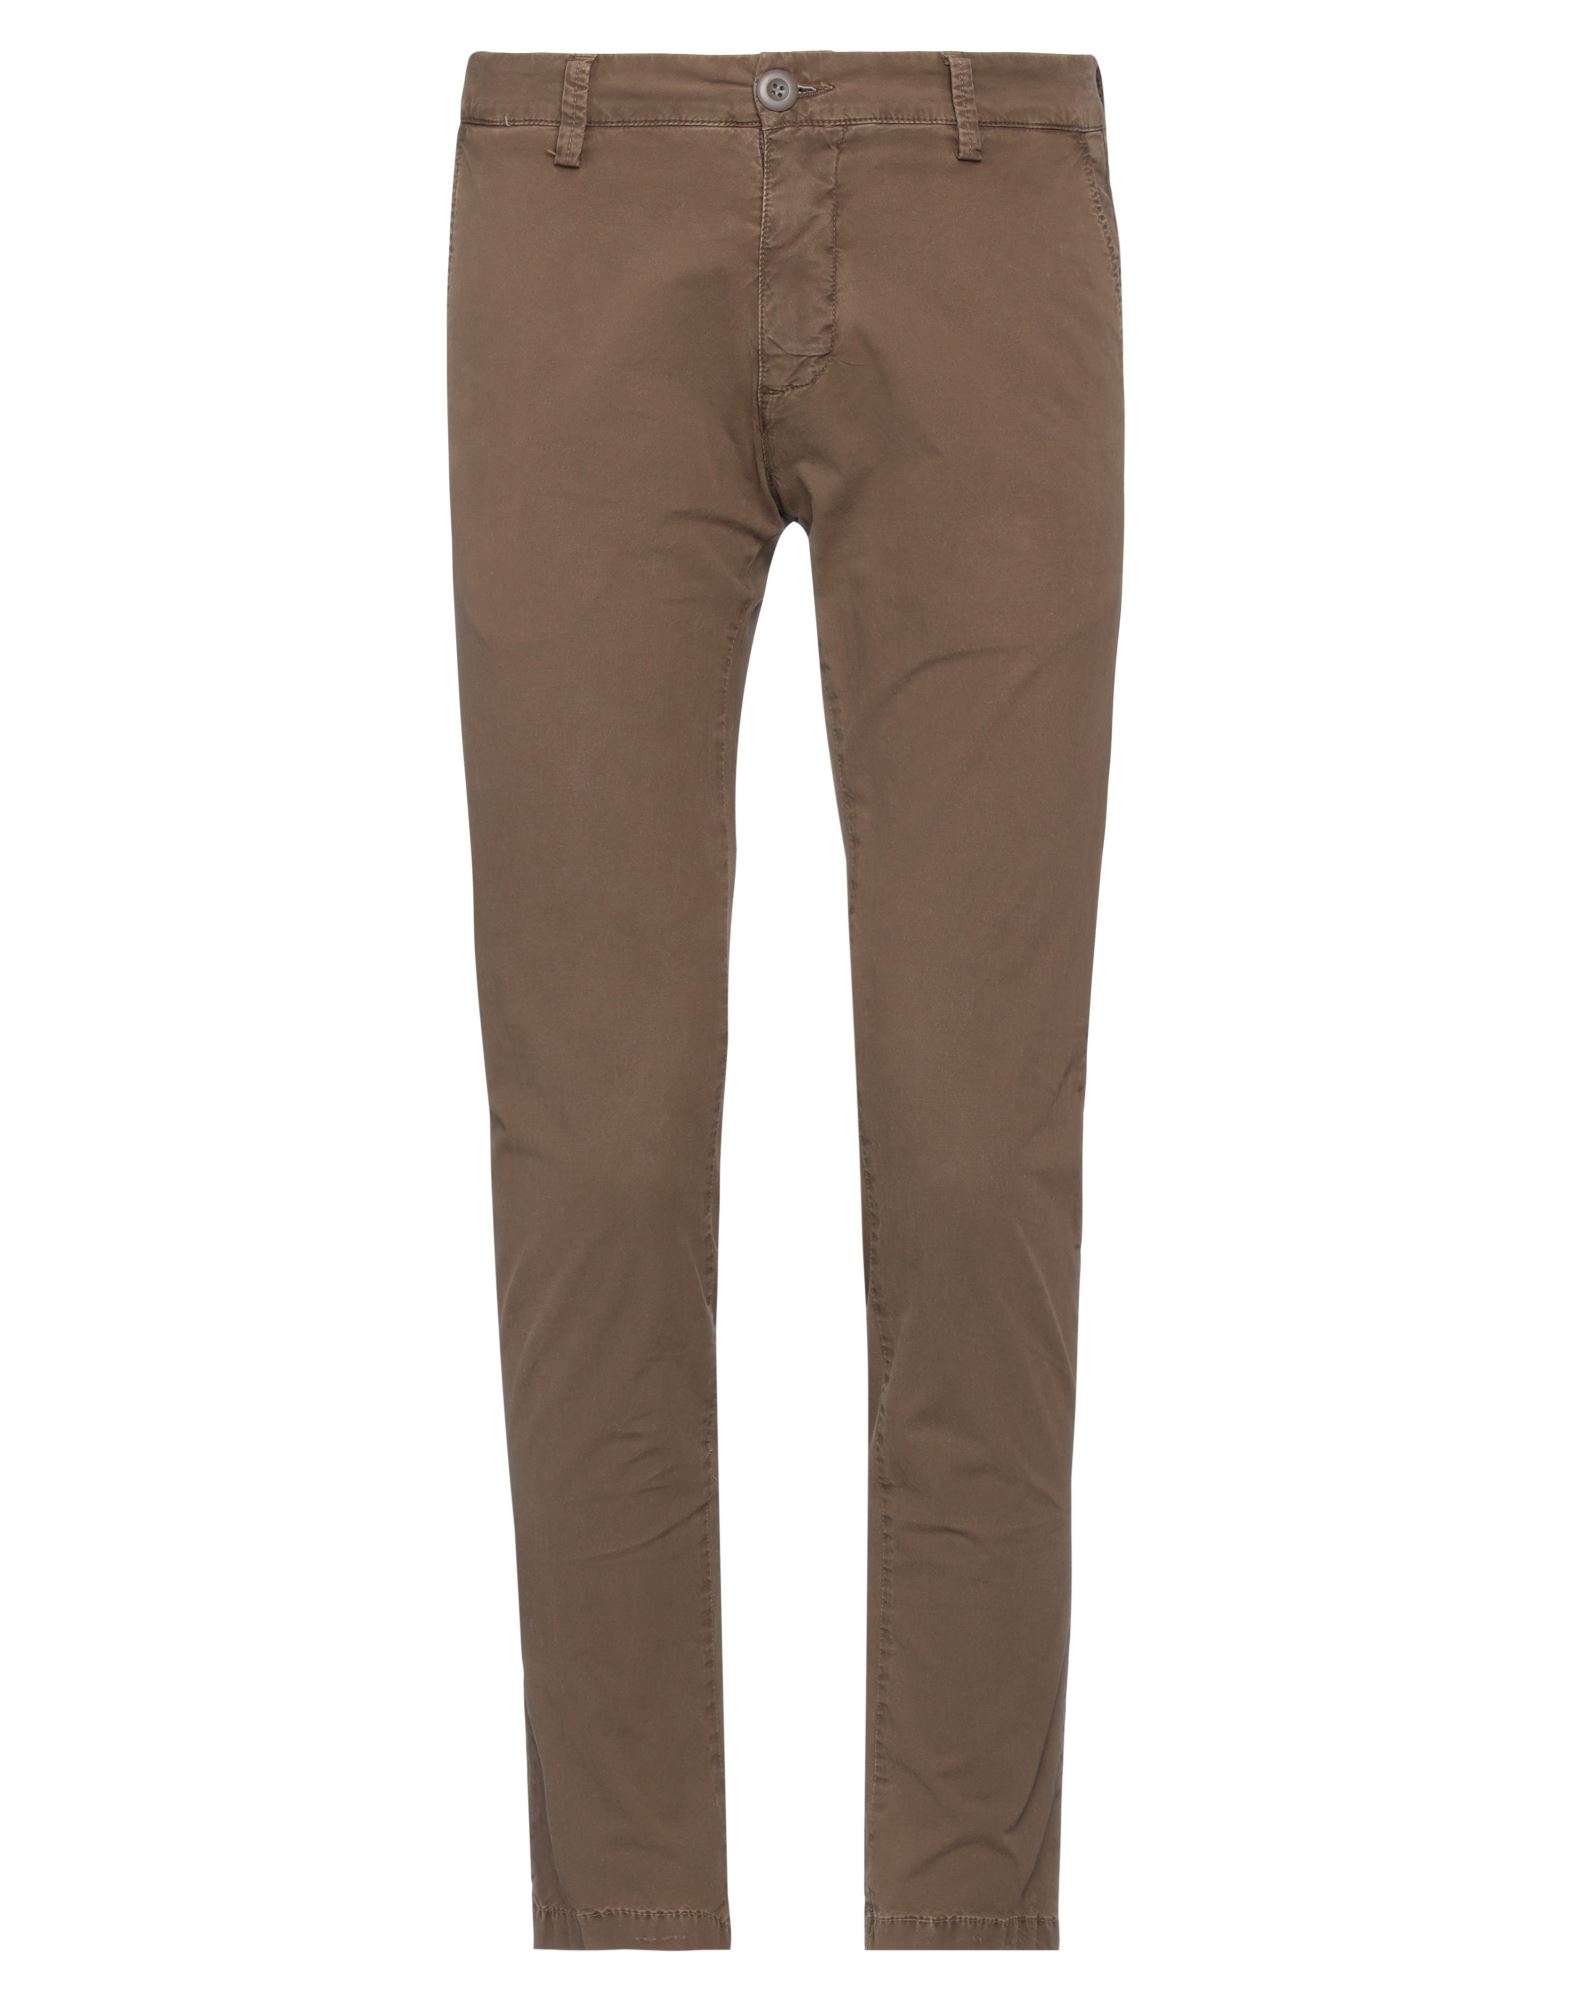 Modfitters Pants In Brown